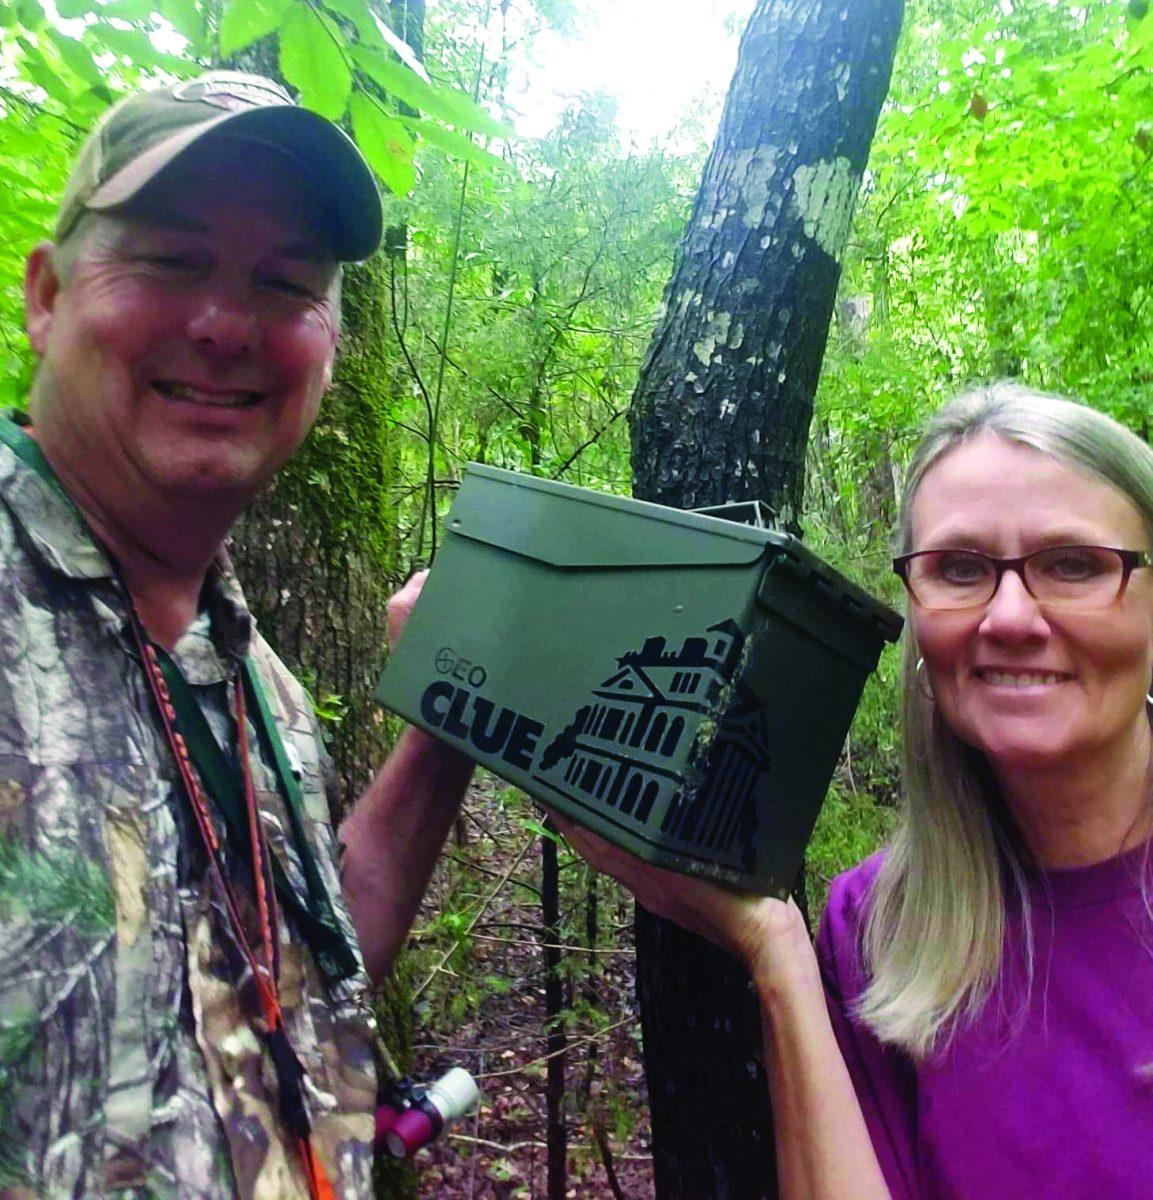 Glenn and Frances Walker have been geocaching for more than 10 years together.